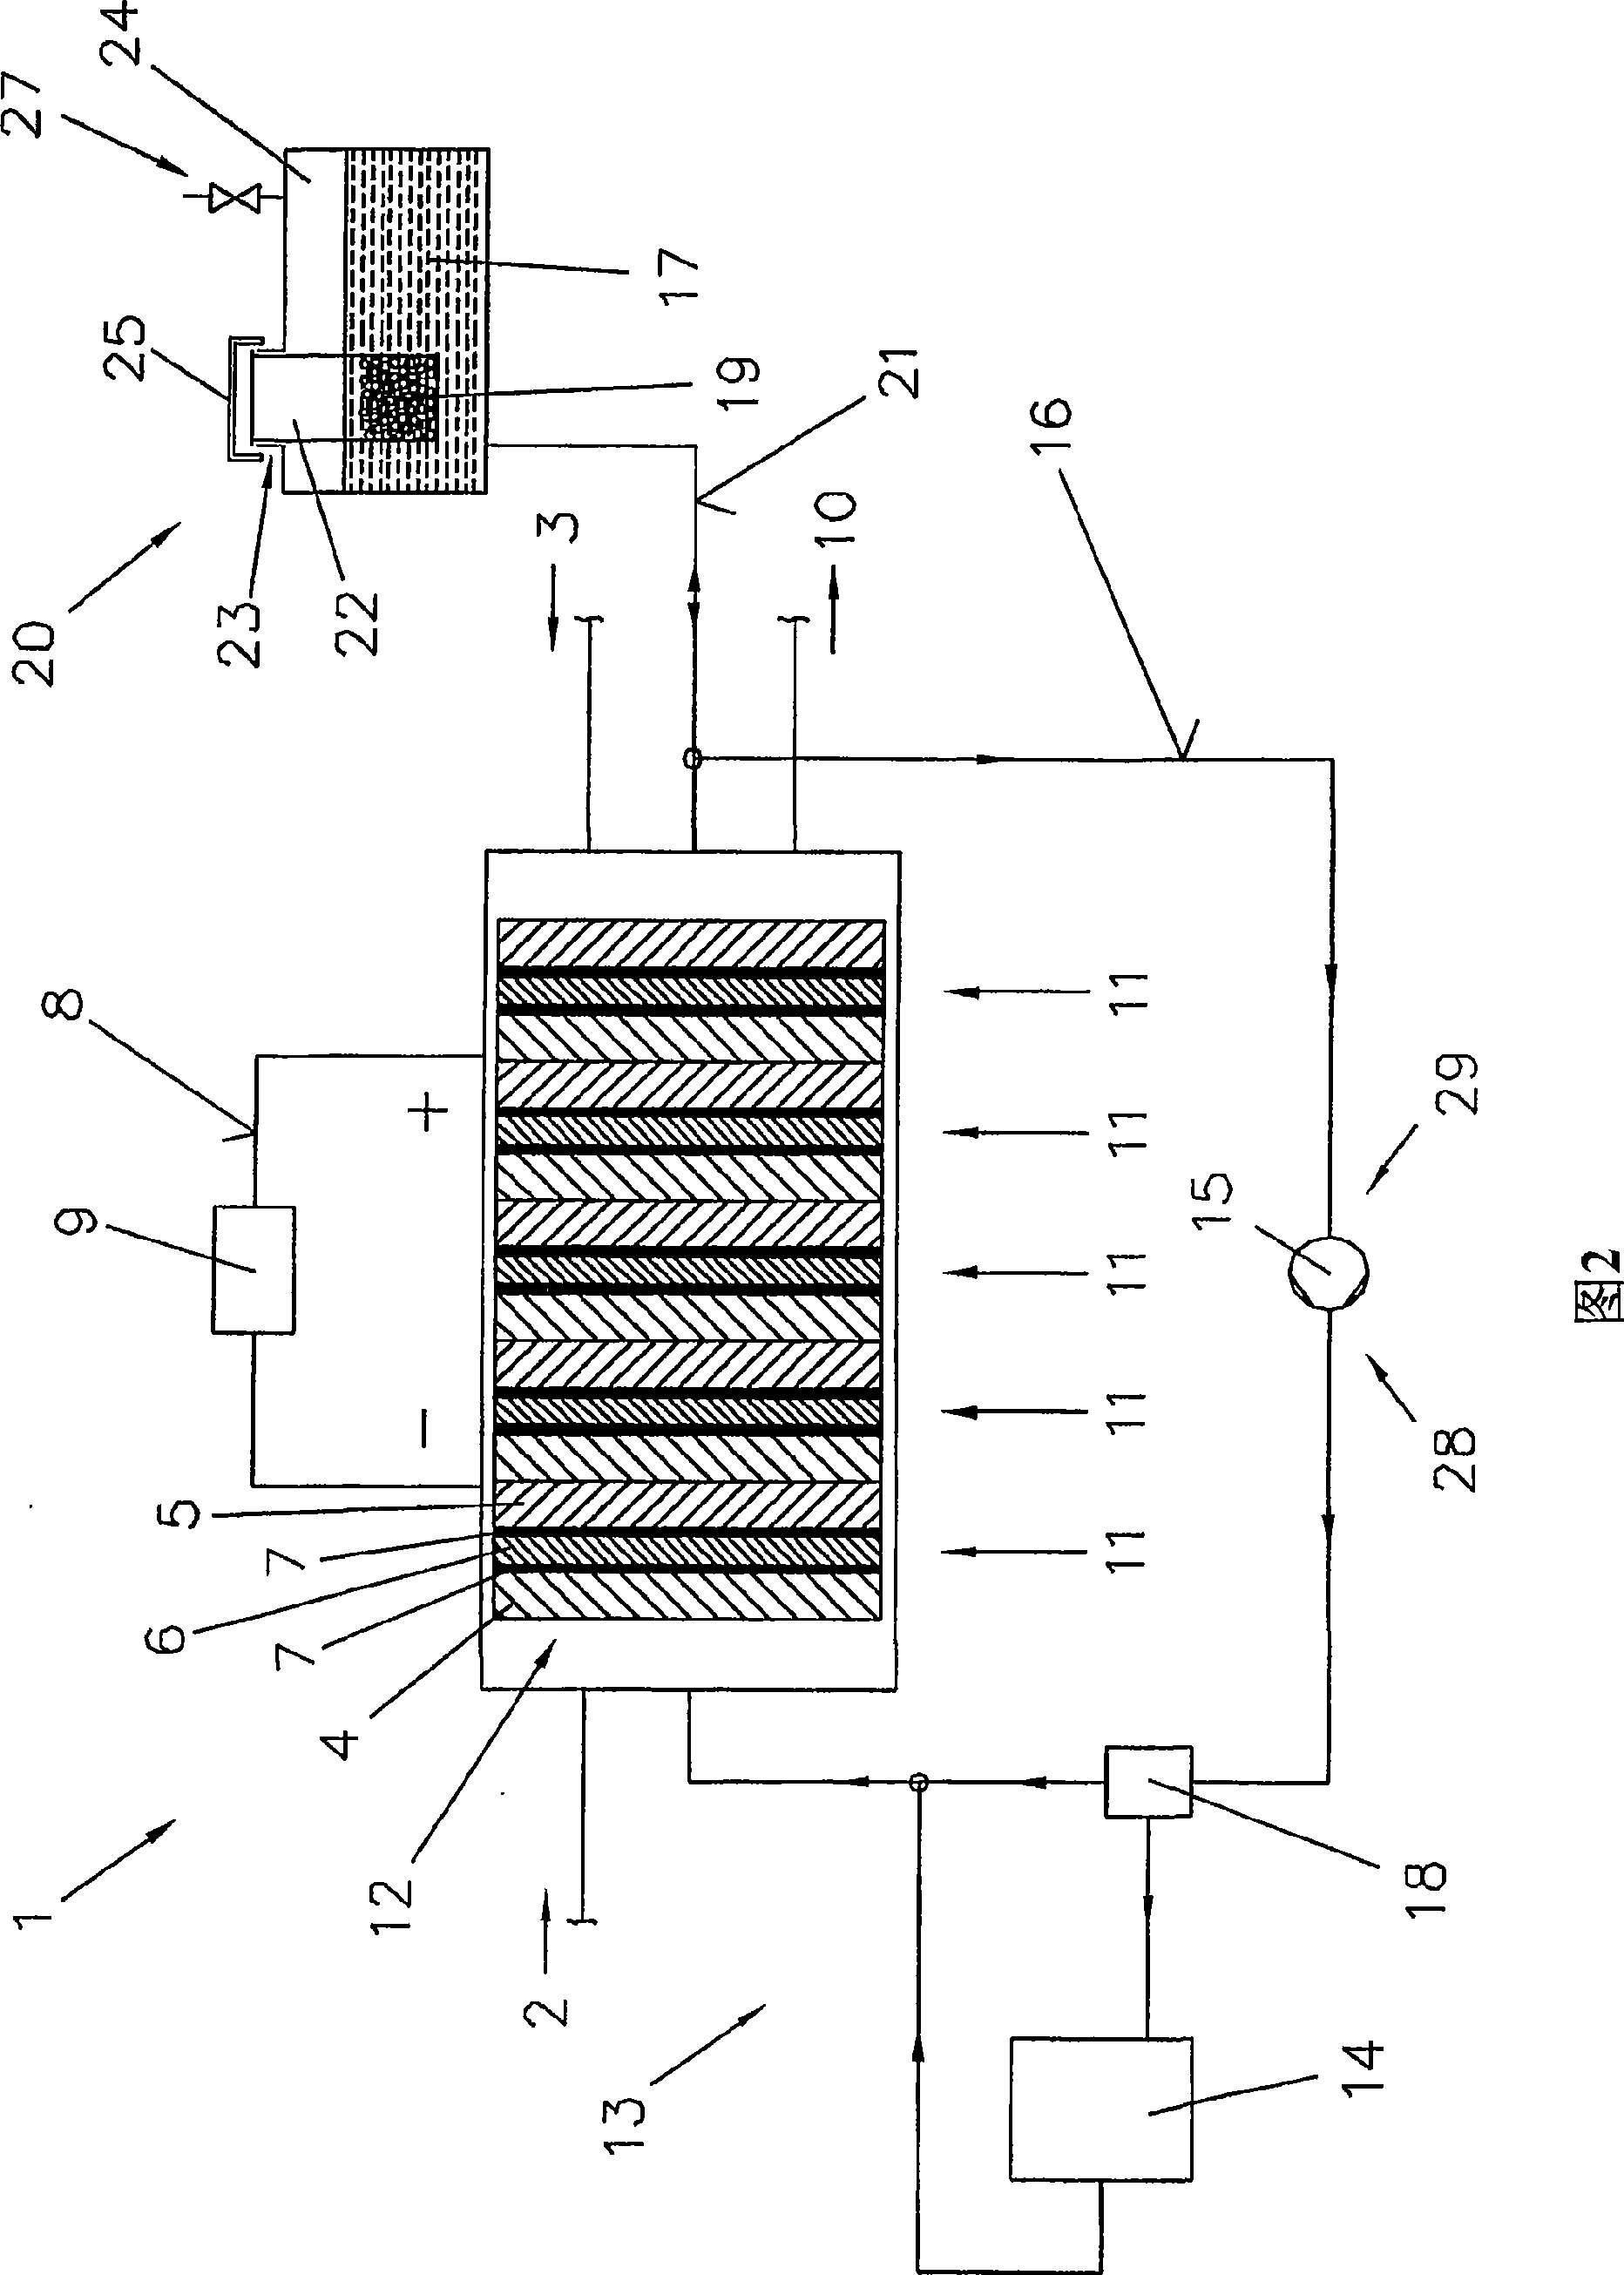 Cooling system for a fuel cell